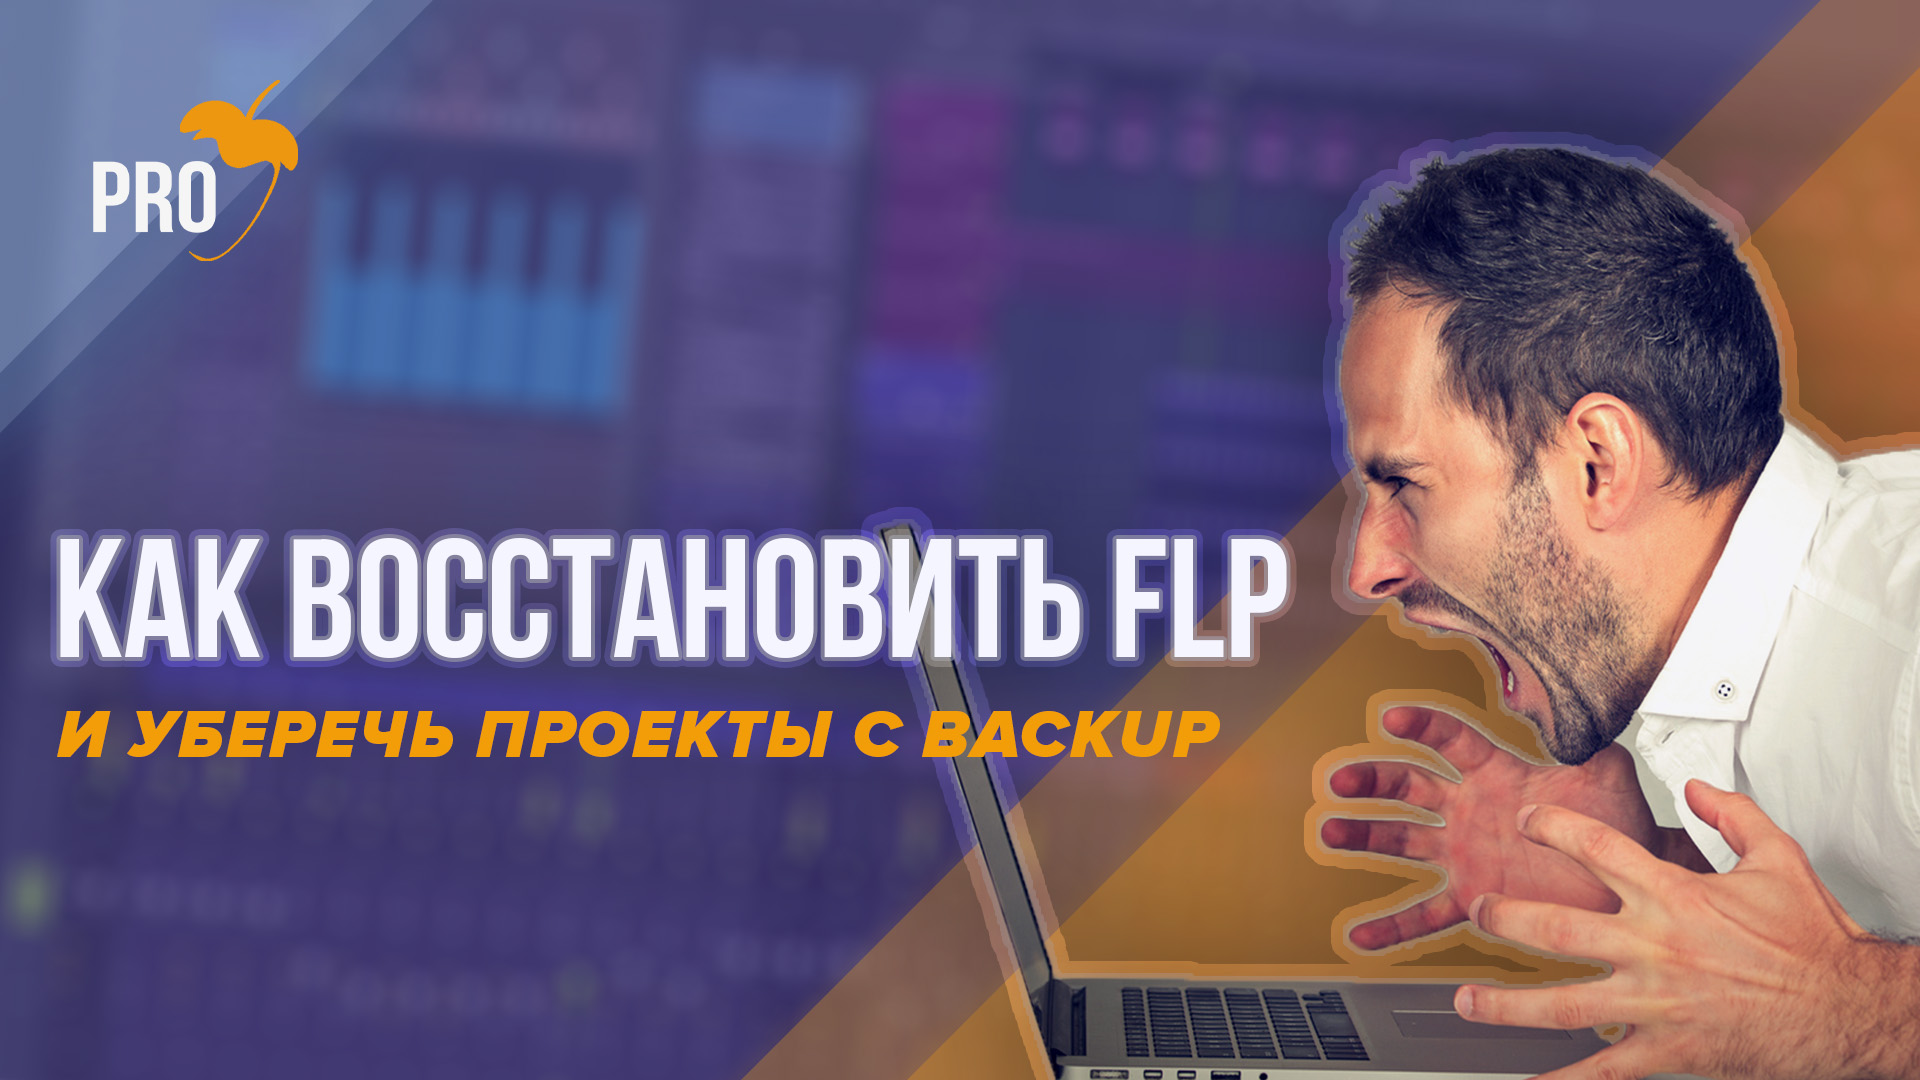 FL PRO Article How to Back Up Your FLPs 1